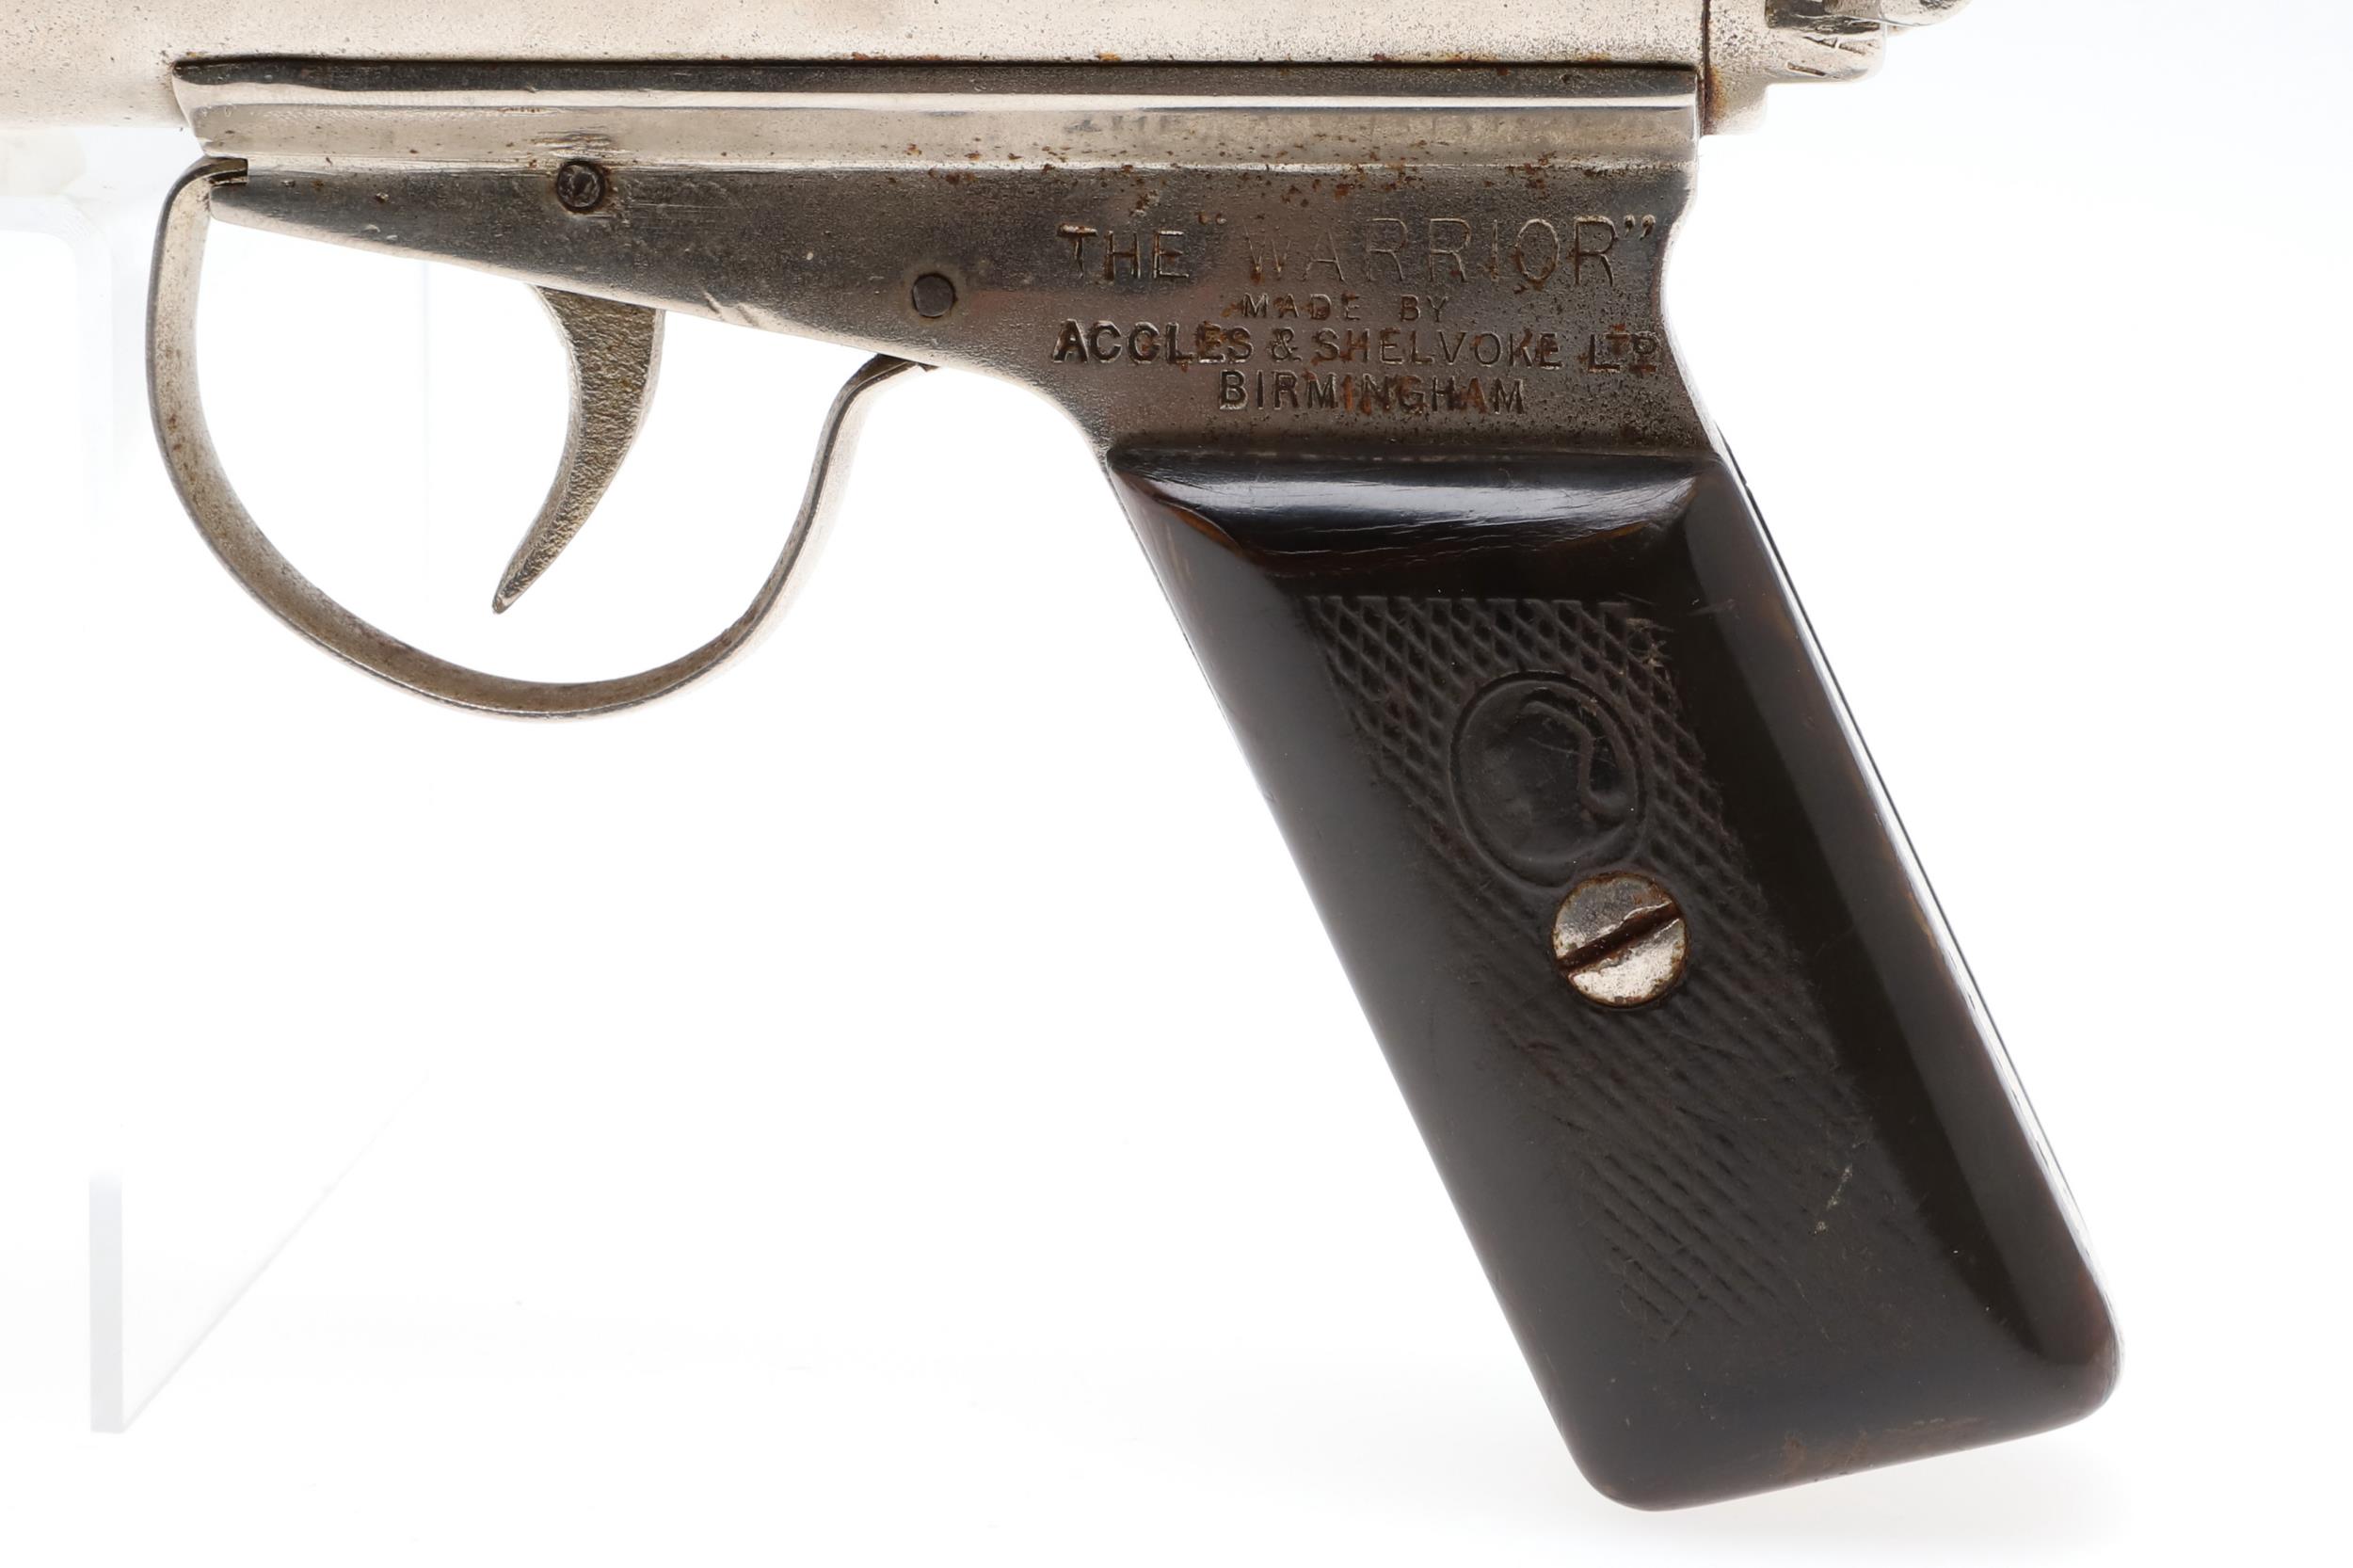 AN ACCLES AND SHELVOKE 'WARRIOR' .177 AIR PISTOL. - Image 7 of 10